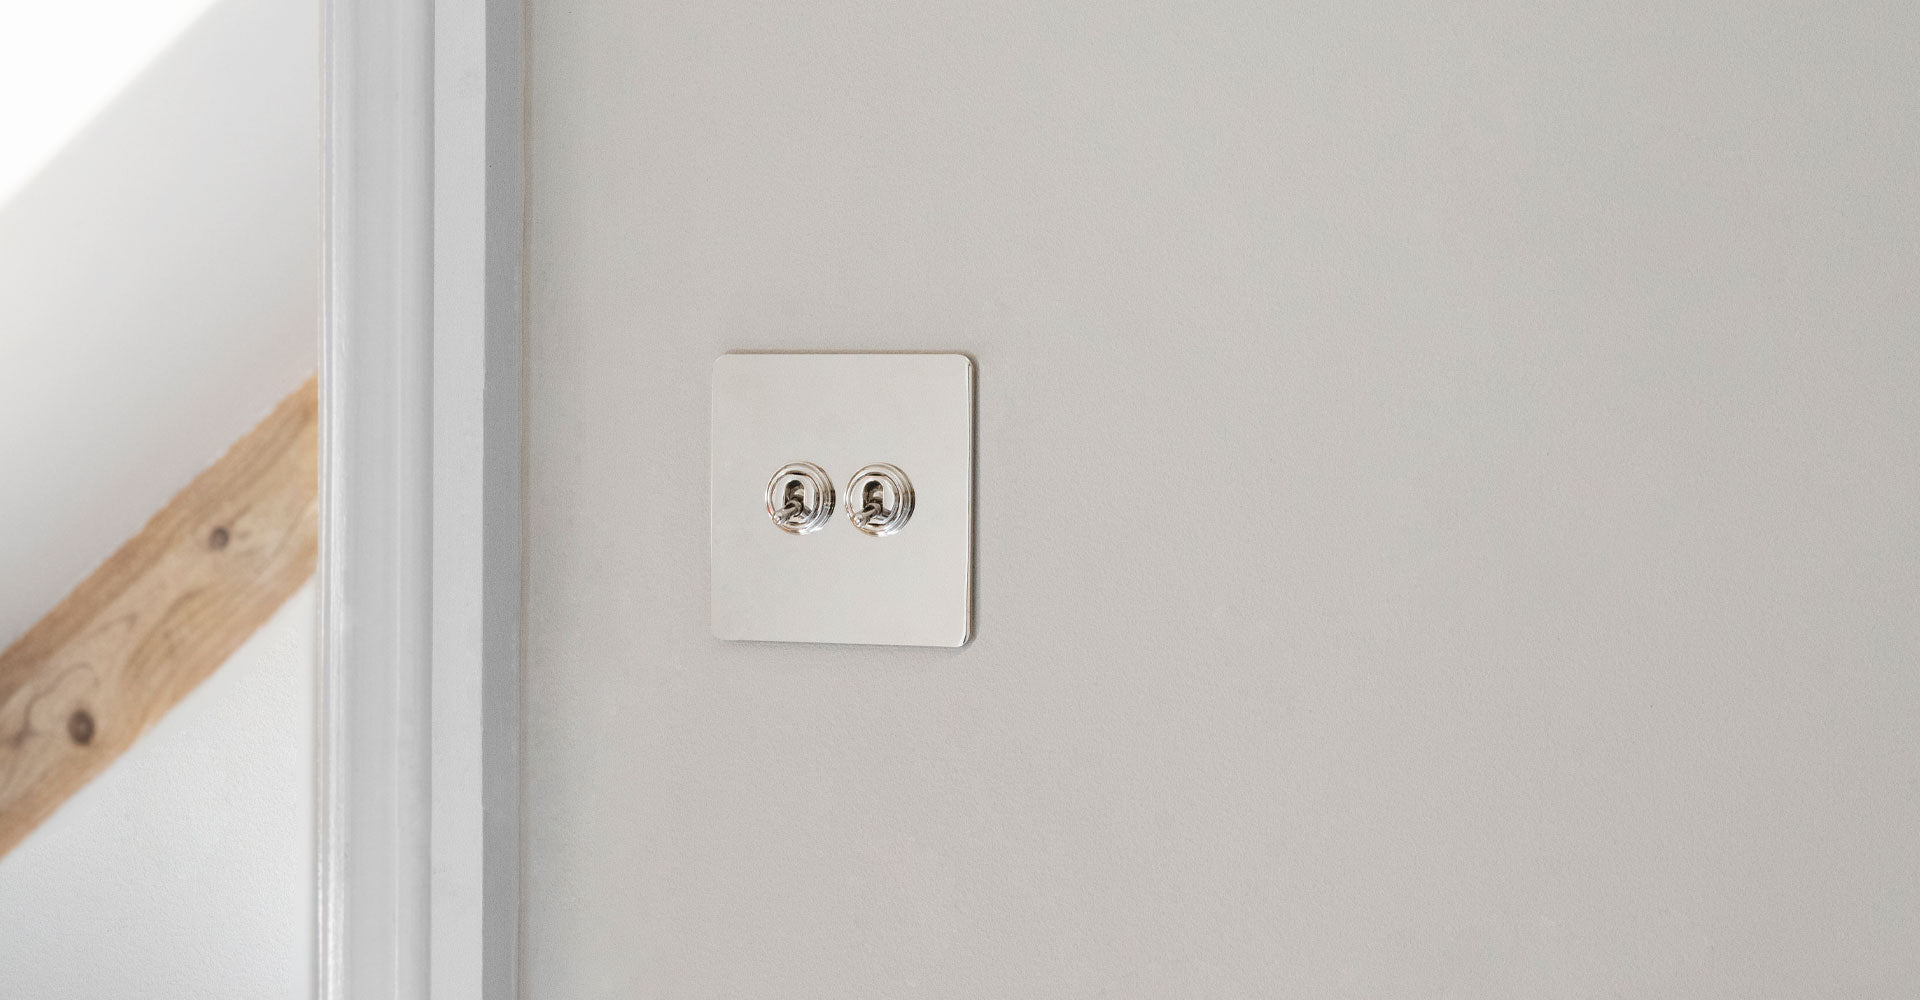 2 Toggle polished nickel switch in room